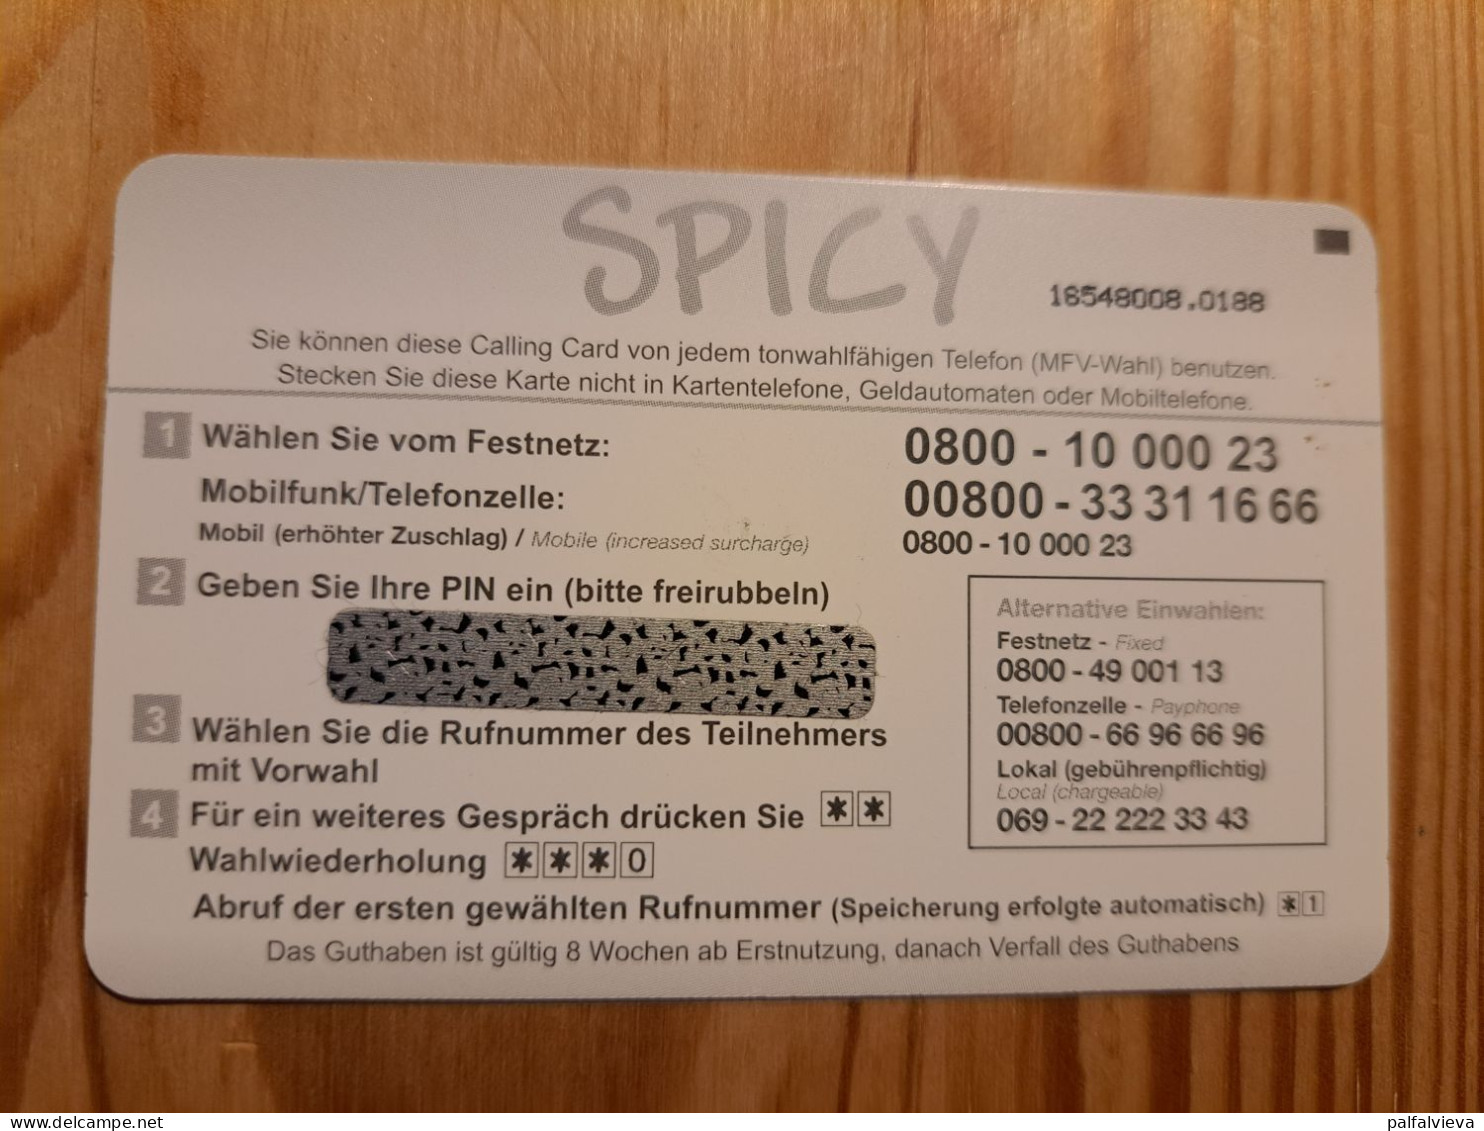 Prepaid Phonecard Germany, ATG. Spicy Handy - [2] Mobile Phones, Refills And Prepaid Cards